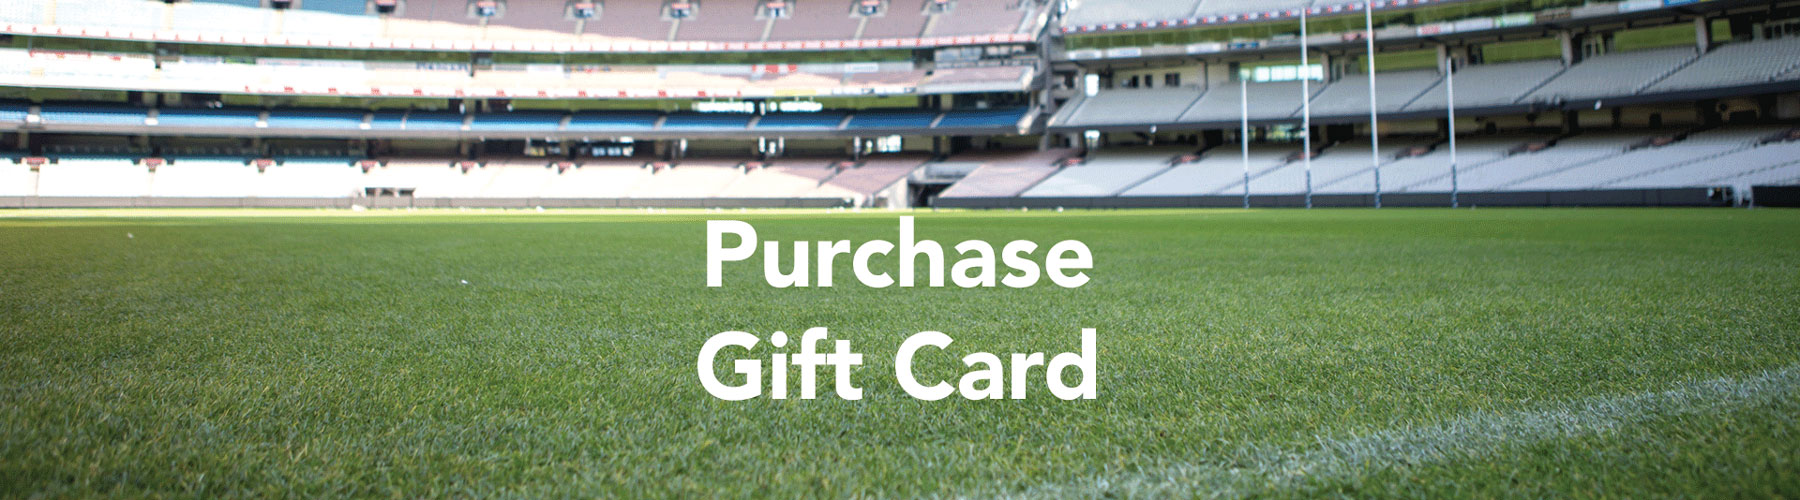 Purchase Gift Card Image